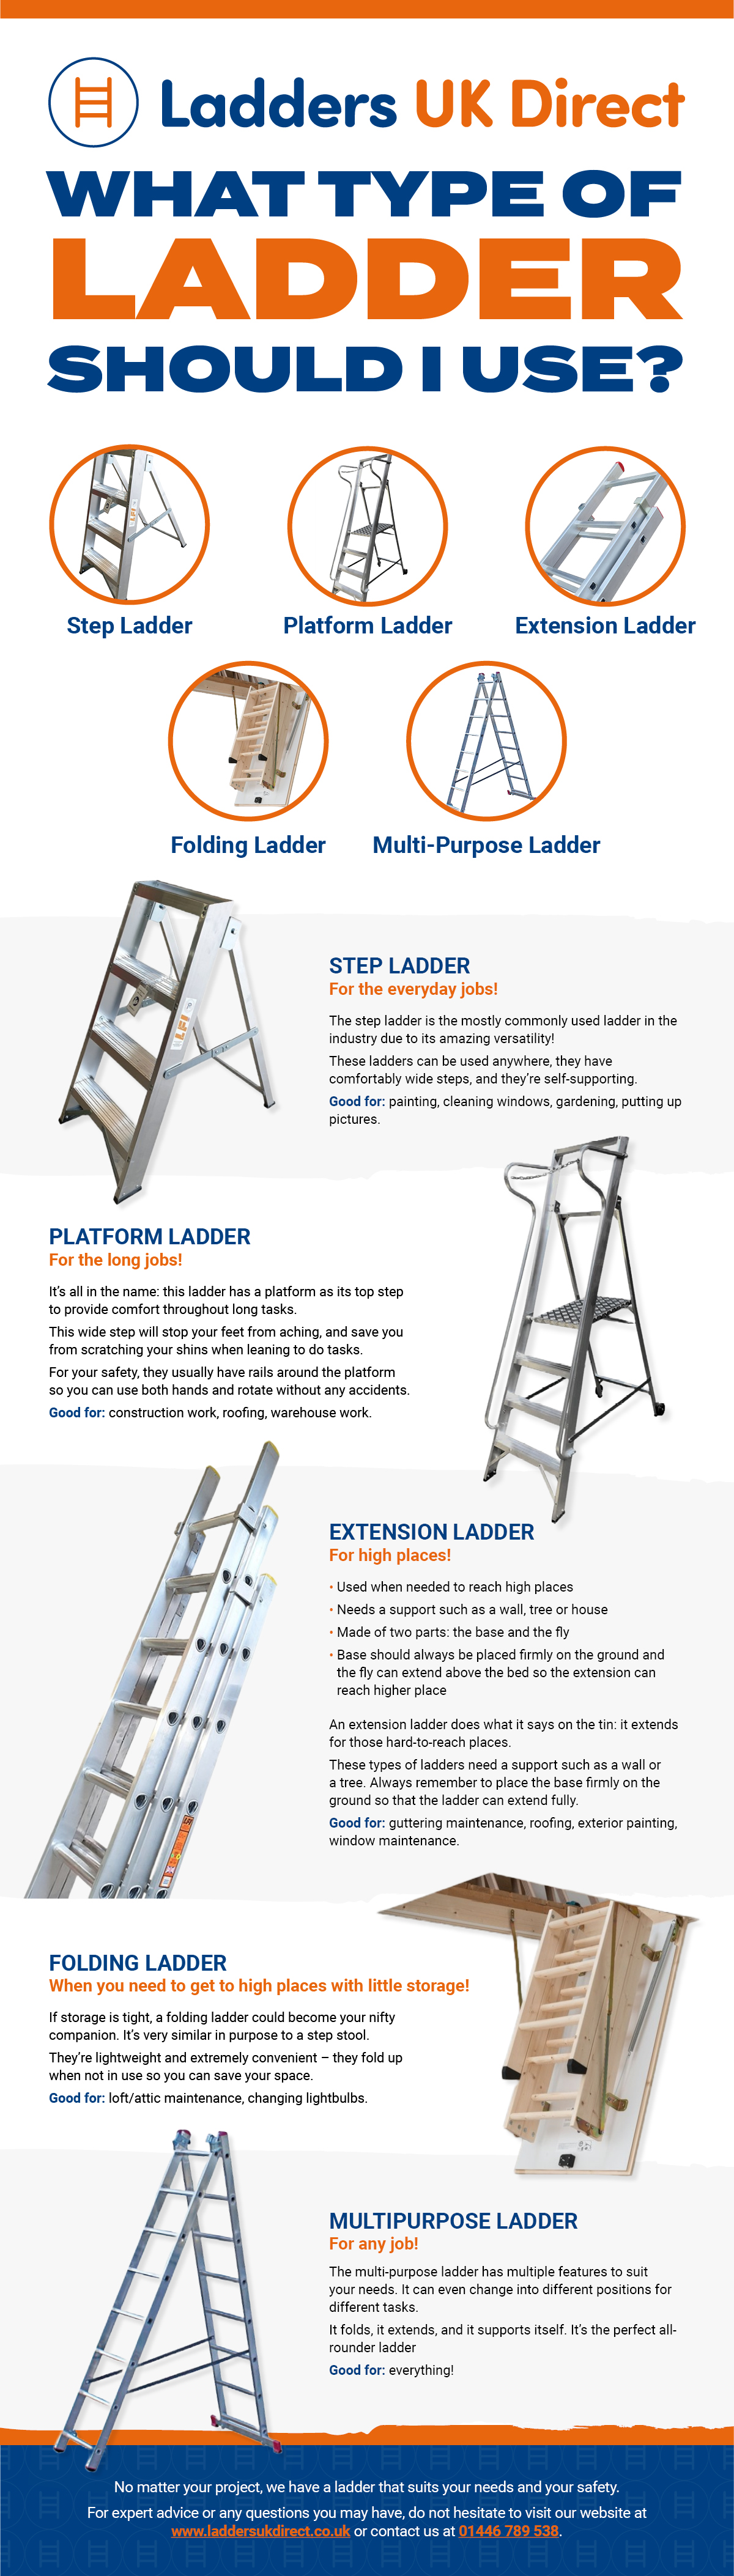 How To Use An Extension Ladder Safely: Expert Tips and Tricks